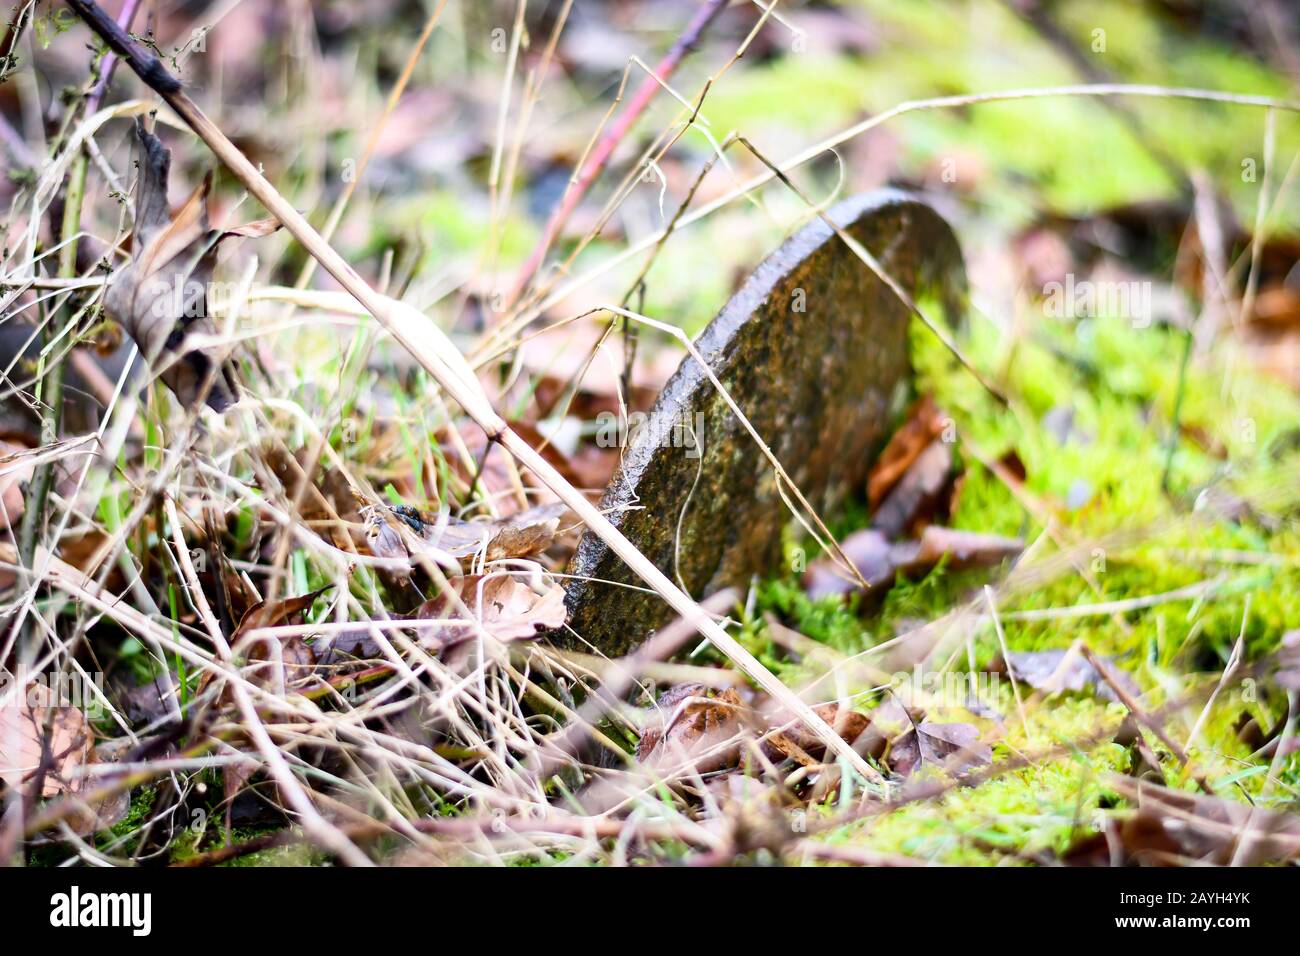 parts of an old forgotten railway with bits of broken train Stock Photo